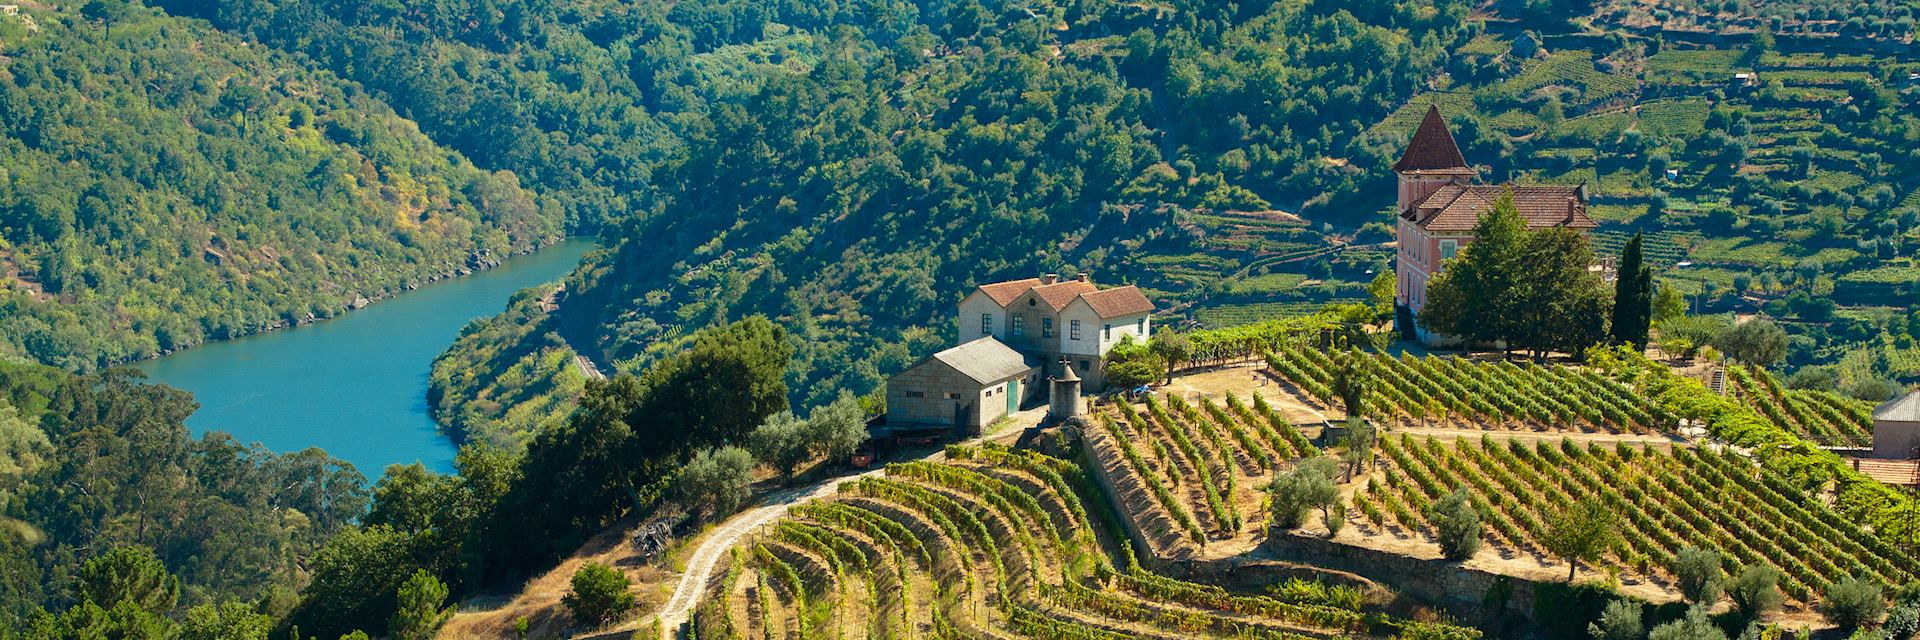 Wine regions of Spain and Portugal| Regional guide | Audley Travel